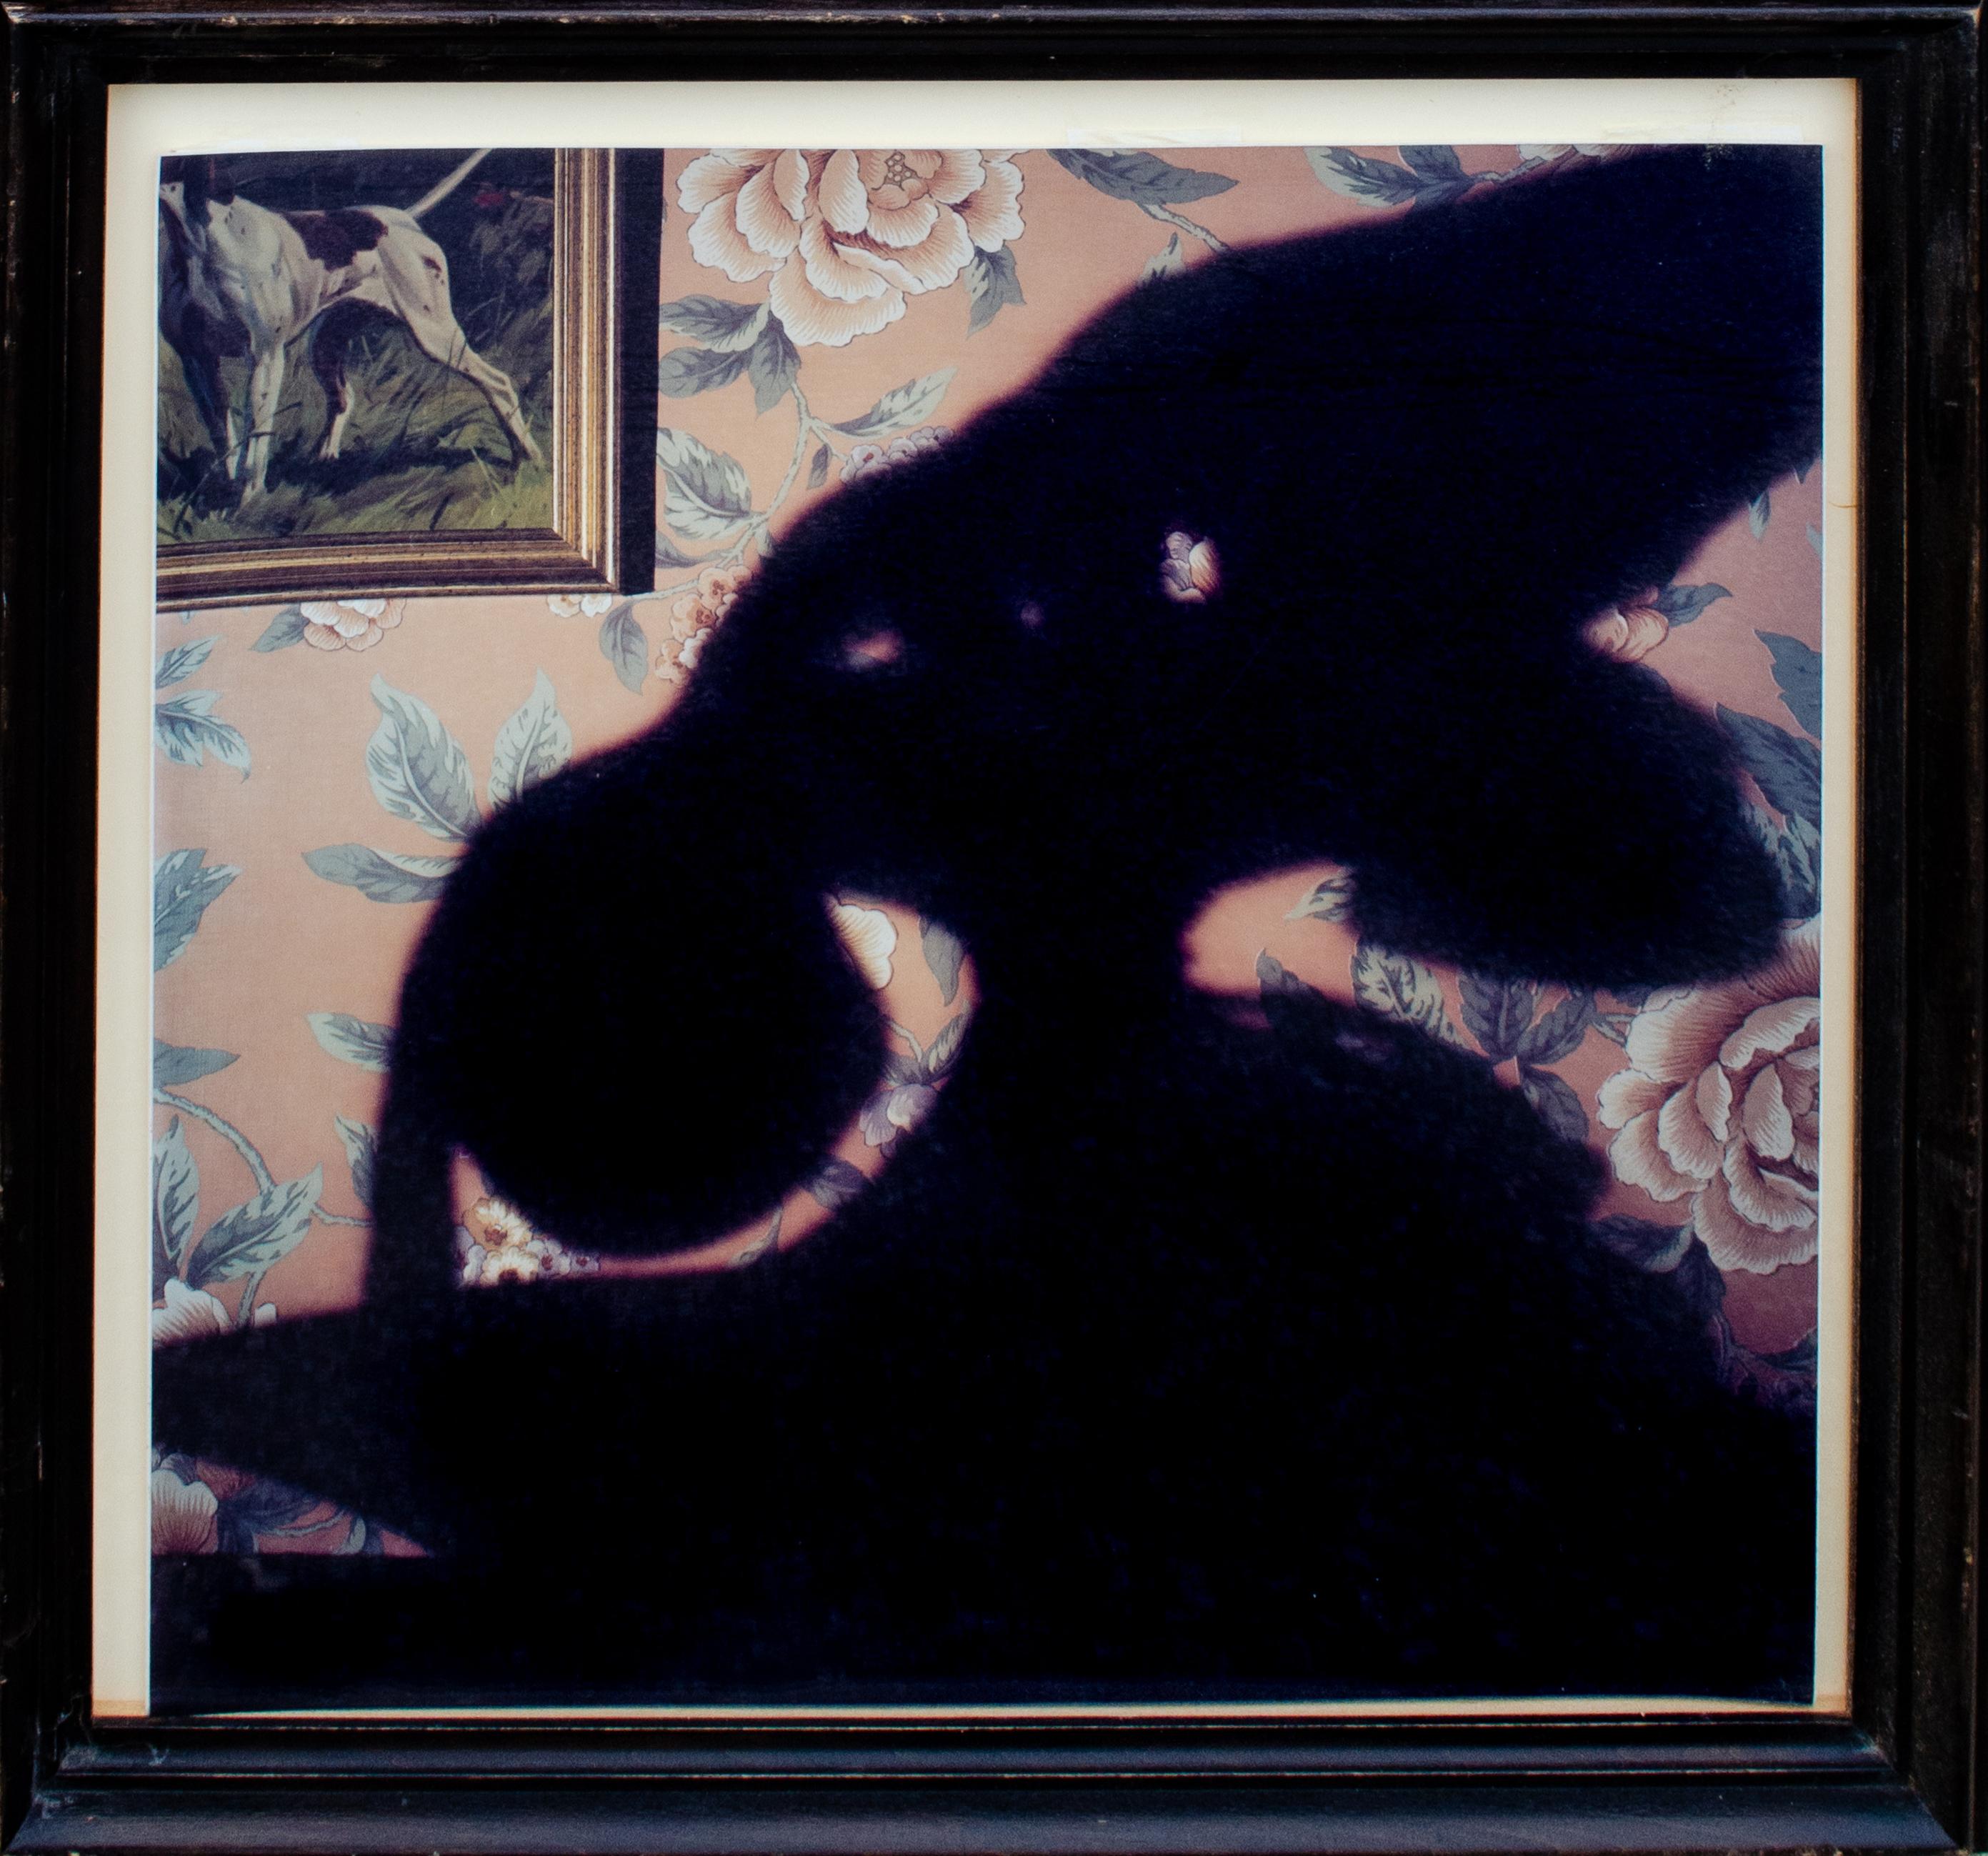 Stephen Frailey
Untitled, 1988
Polaroid print
Sight: 19 3/4 x 19 3/4 in.
Framed: 24 1/4 x 24 x 1 3/4 in. 
Edition 2/3

Provenance: 
Lieberman & Saul, New York

Stephen studied at the San Francisco Art Institute and received his BA from Bennington